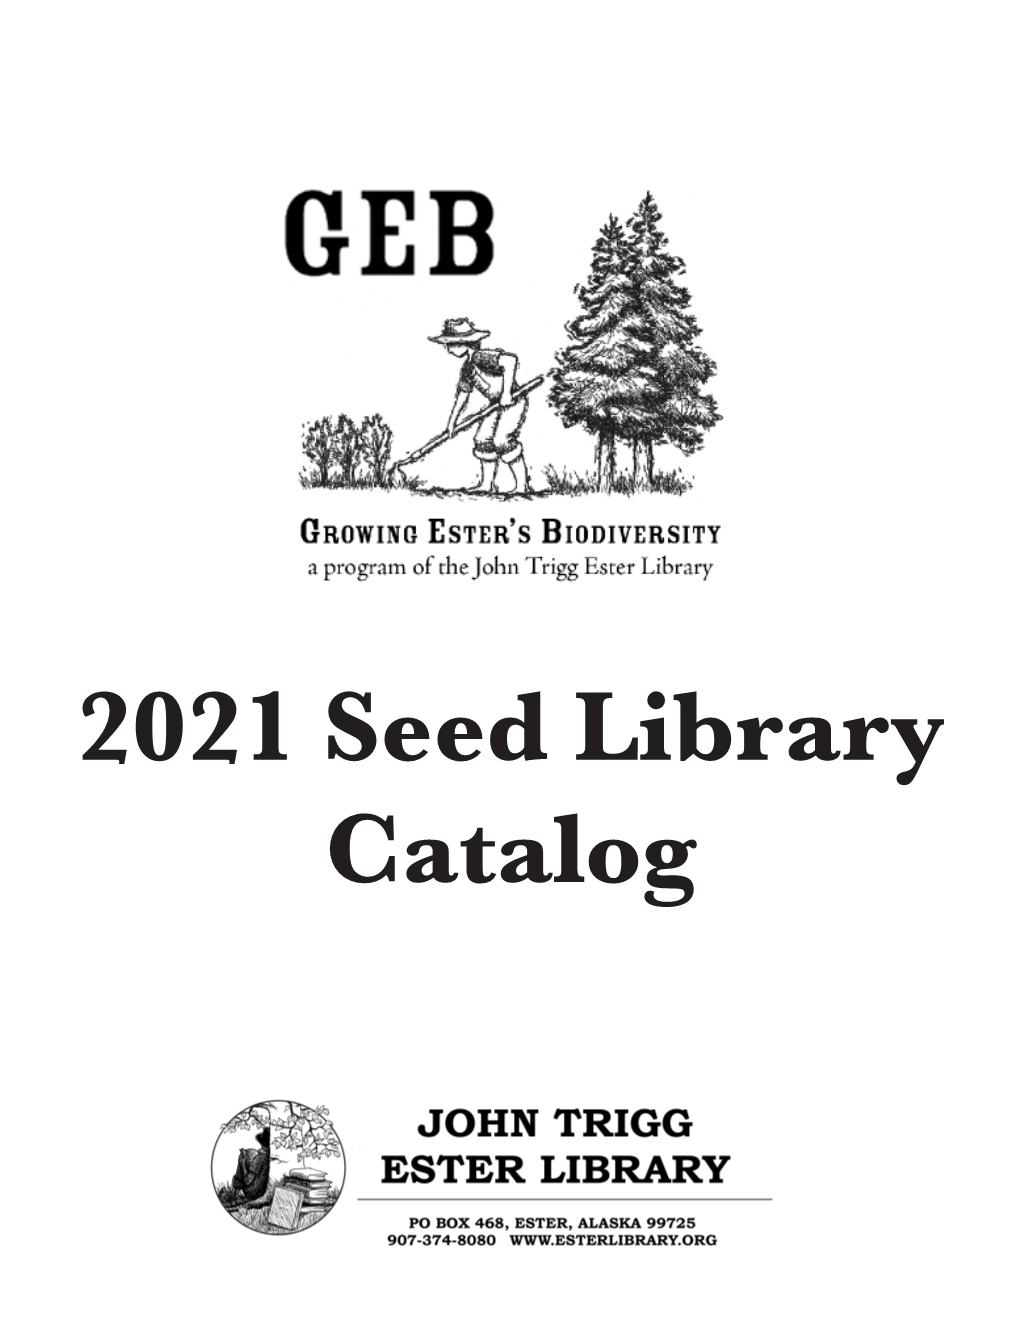 2021 Seed Library Catalog Growing Ester’S Biodiversity - 2021 Seed Library Catalog 2 2021 Seed Library Catalog